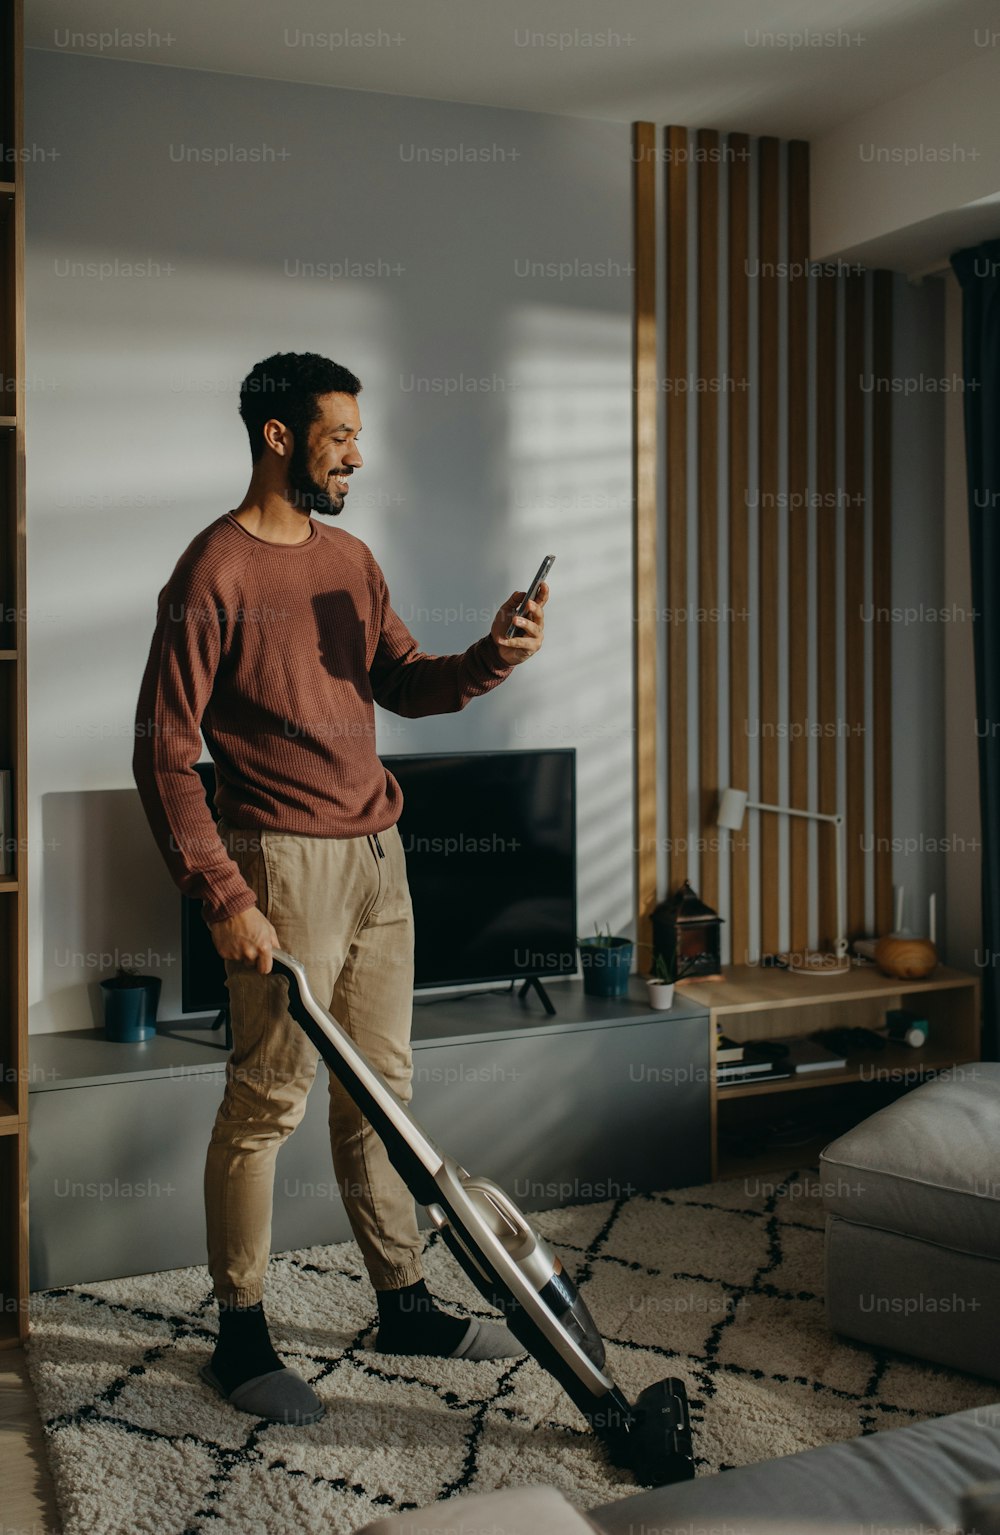 A young man vacuum cleaning carpet in living room